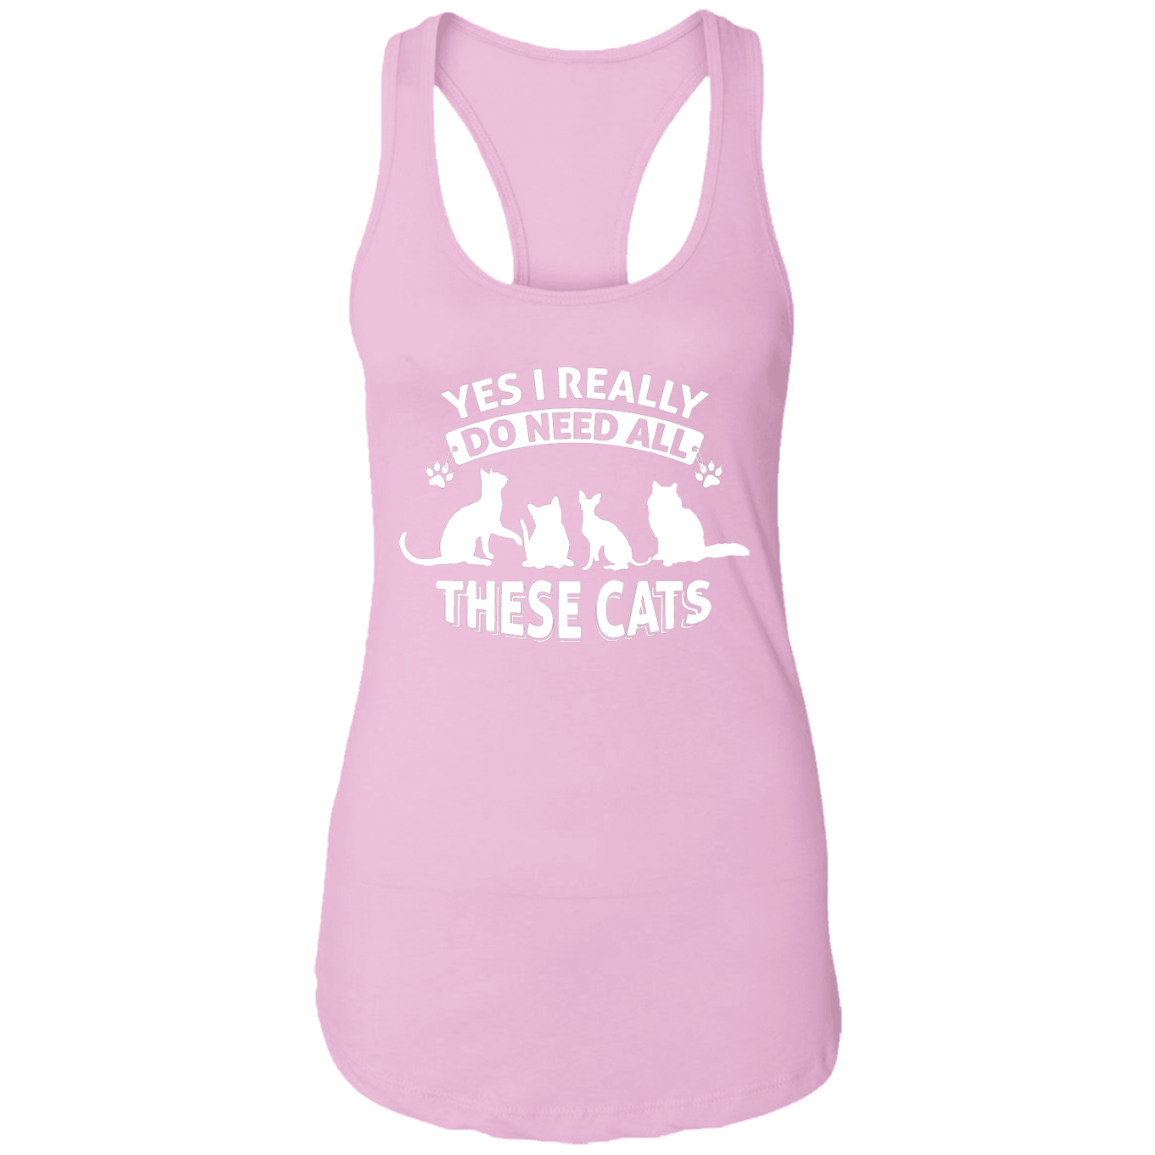 Yes I Do Need All These Cats - Ladies Racer Back Tank.